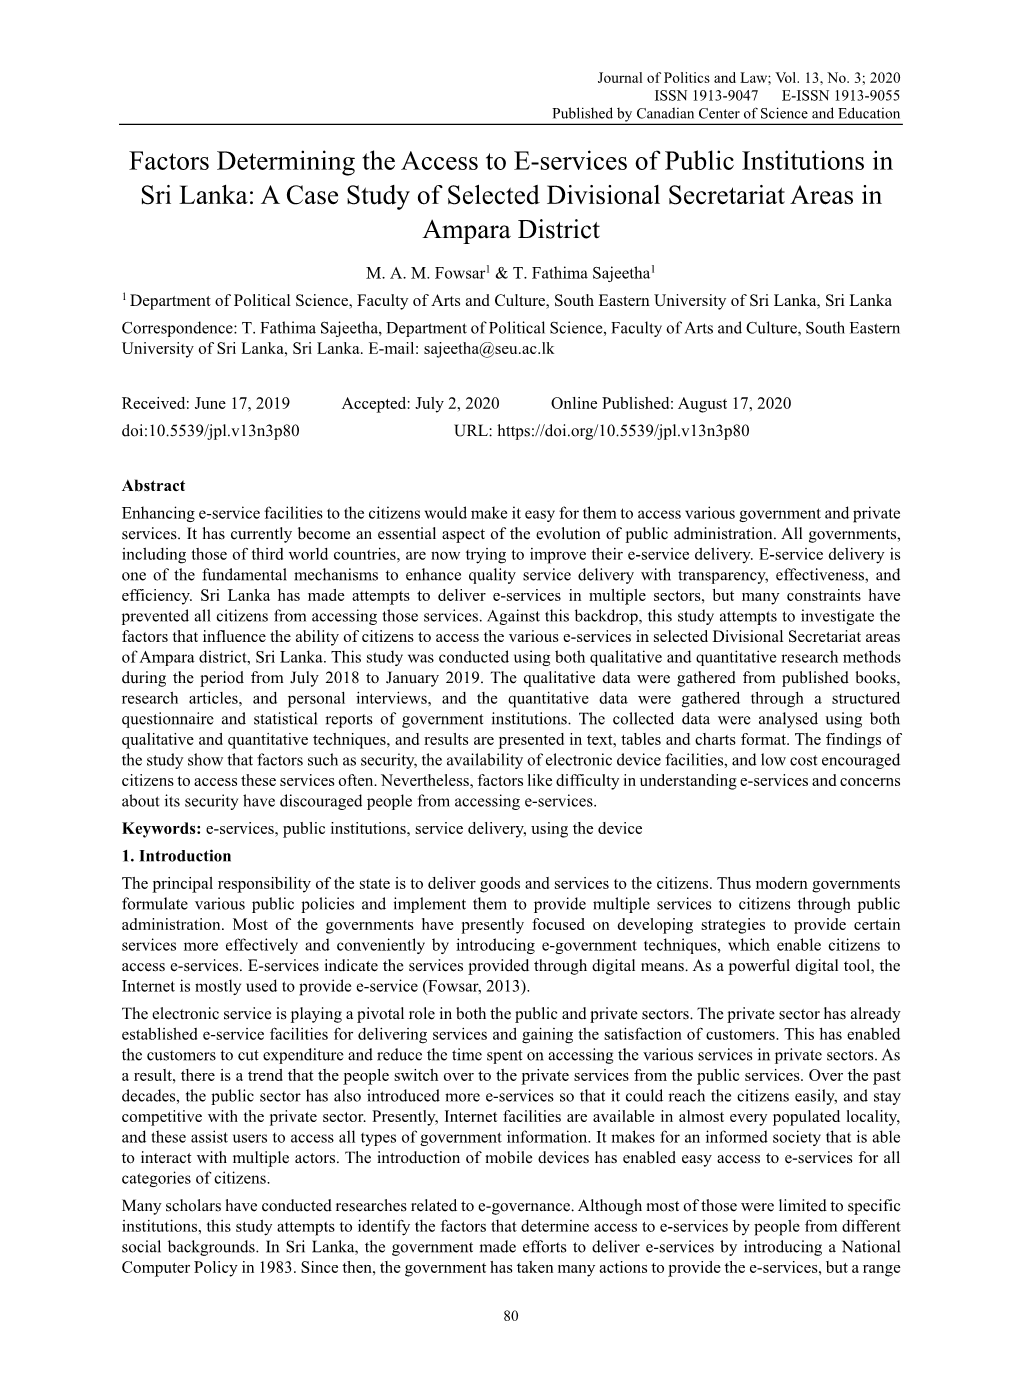 Factors Determining the Access to E-Services of Public Institutions in Sri Lanka: a Case Study of Selected Divisional Secretariat Areas in Ampara District